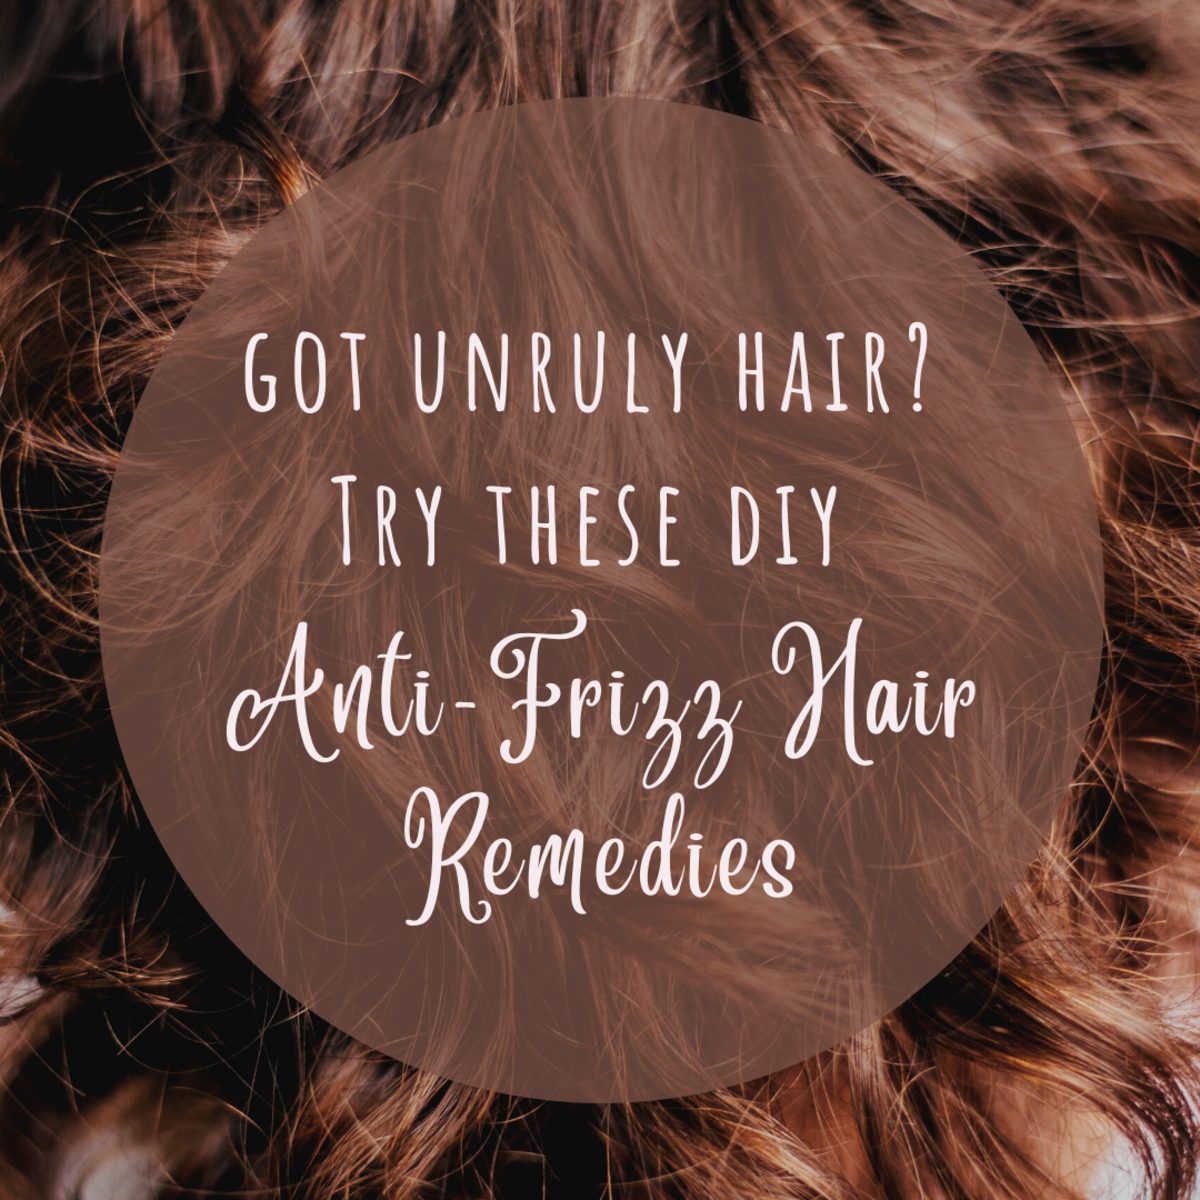 Frizzy hair can be such a pain! Luckily, there are some awesome homemade hair masks that you can whip up in minutes that will help ease your unruly hair's frizziness!